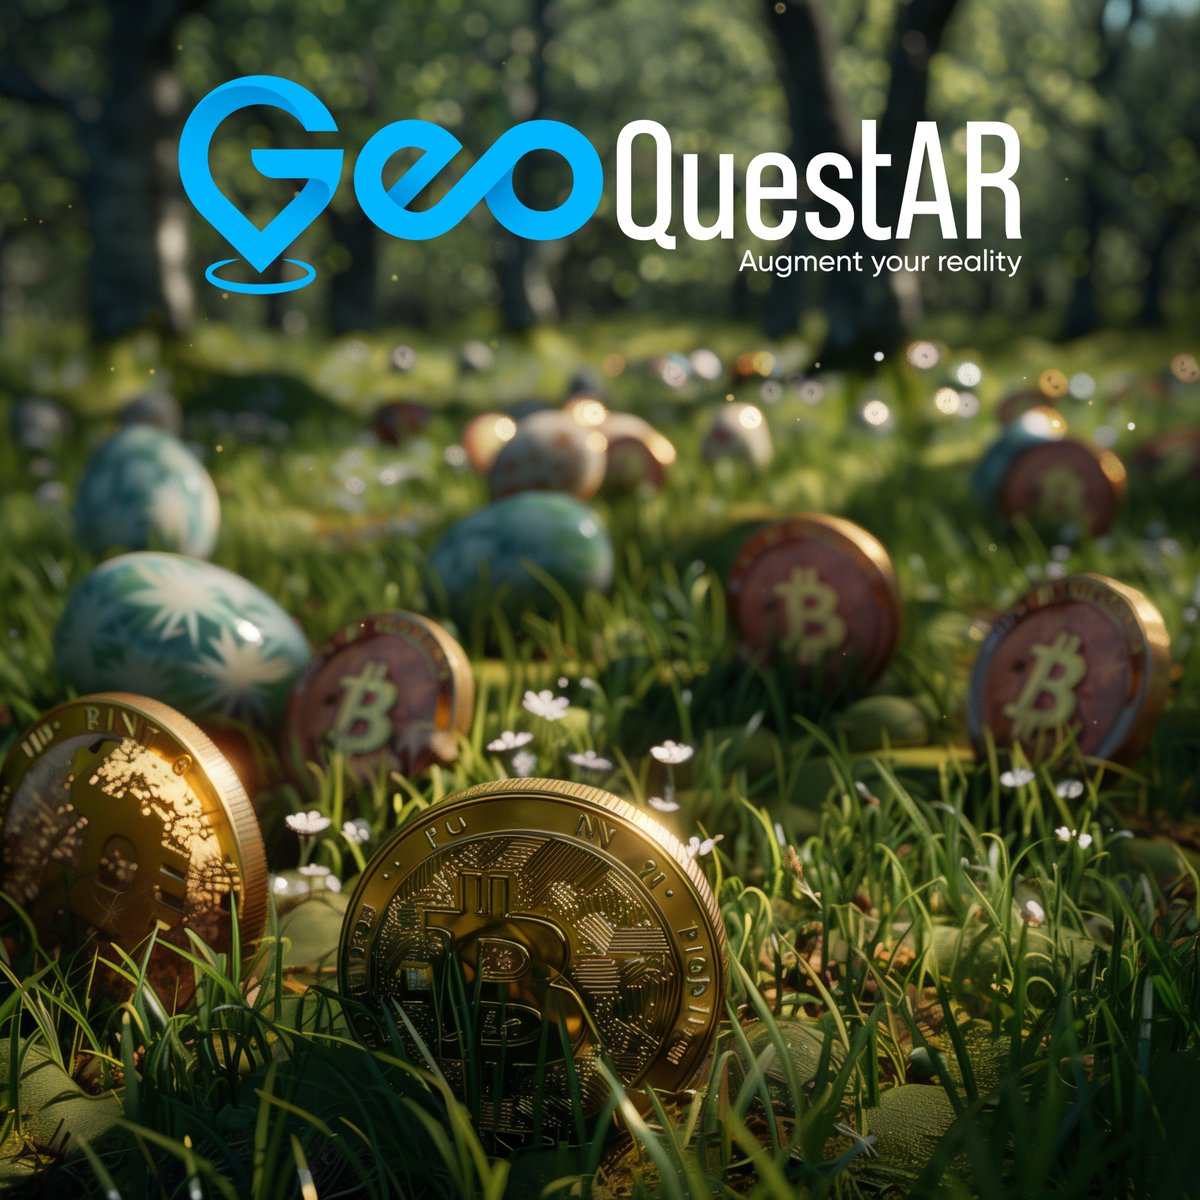 Dexioprotocol wishes you a happy easter 2024. Combine your Easter egg hunt with GeoQuest AR for an enhanced Easter experience. Download GeoQuest AR today via the linked post.